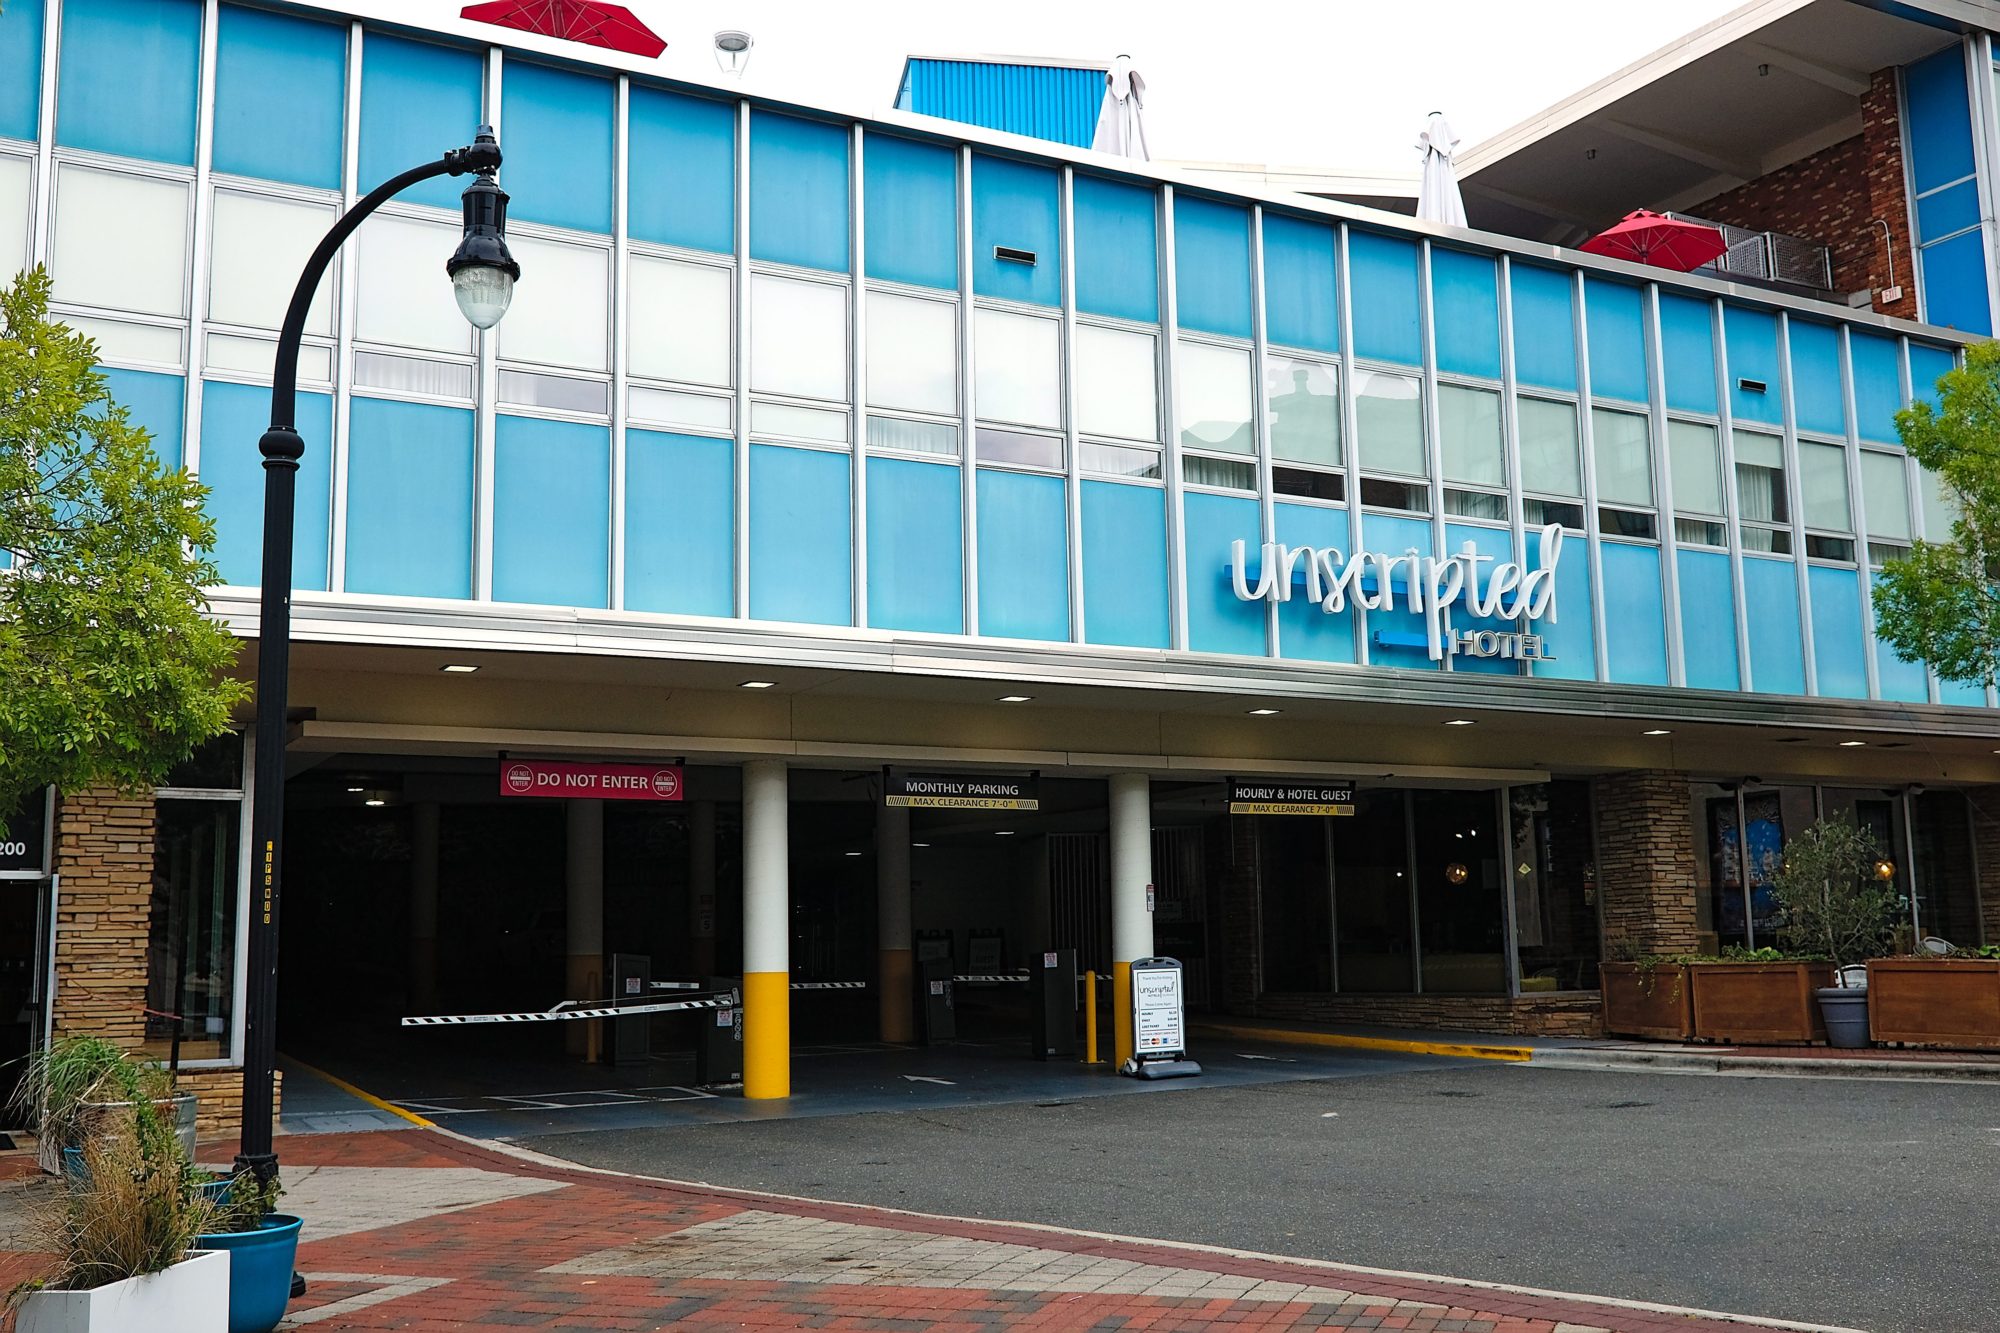 Exterior of the Unscripted Durham hotel